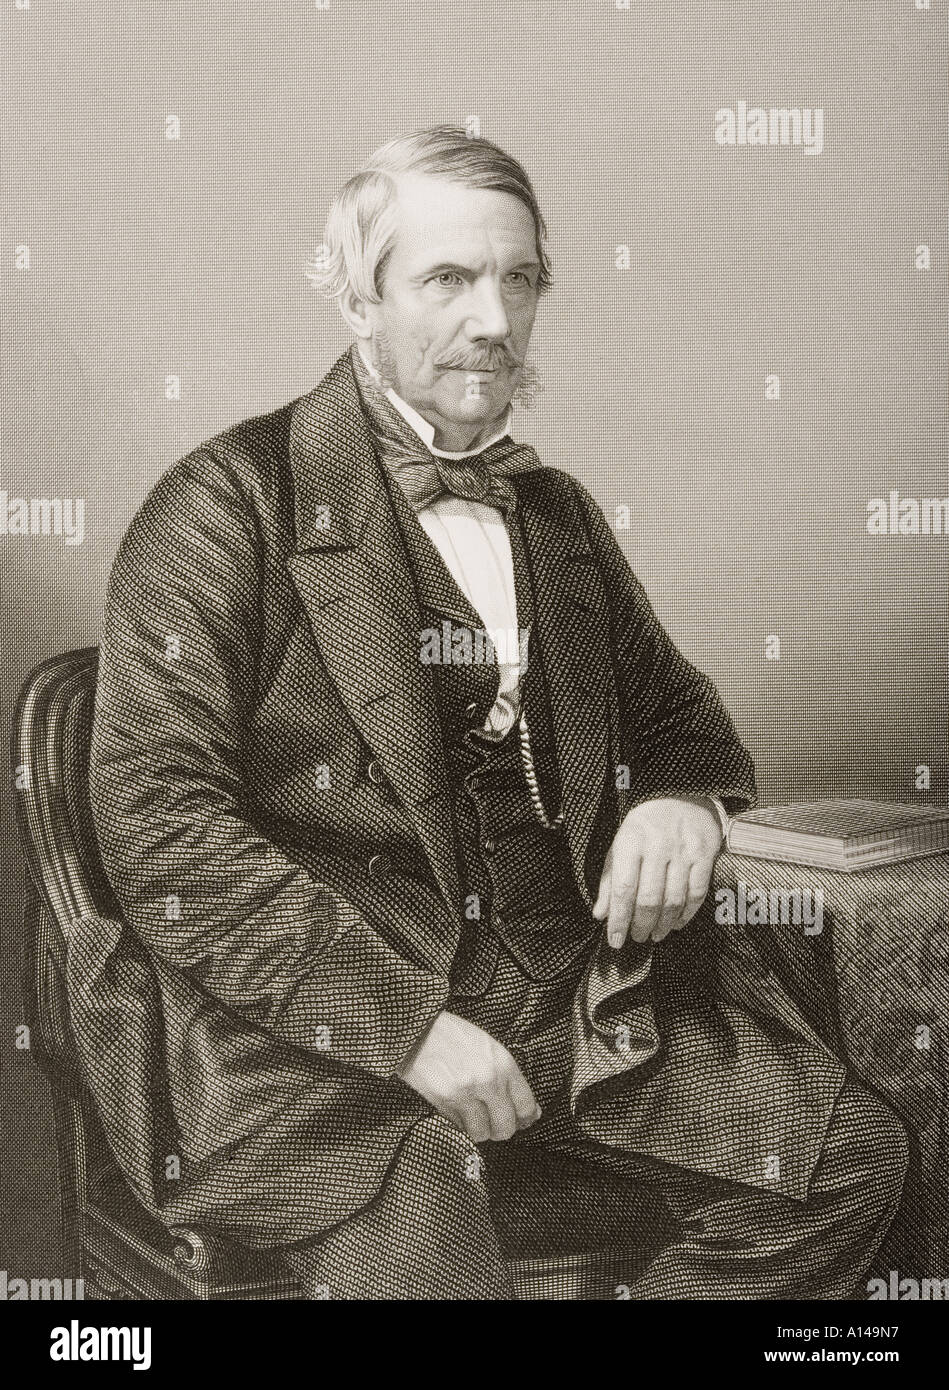 Sir John Laird Mair Lawrence, 1st Baron Lawrence, 1811 - 1879.  English-born Ulsterman, a prominent British Imperial statesman, Viceroy of India. Stock Photo